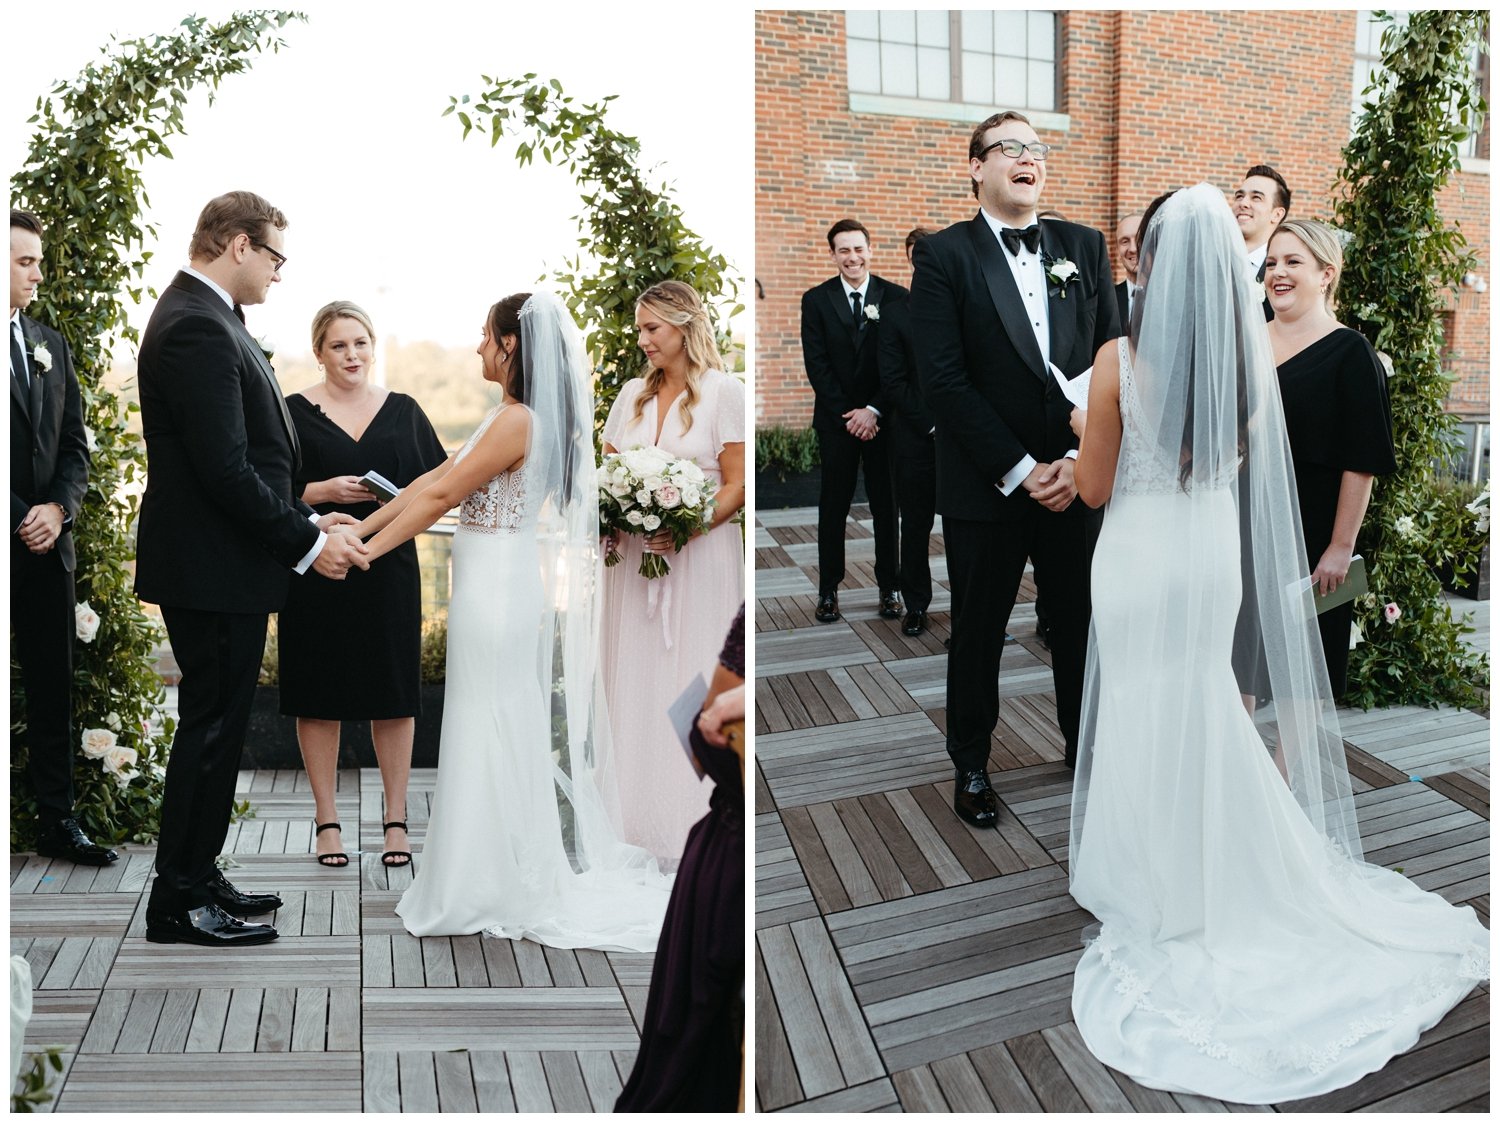 The couple exchanges vows at the Ponce City Market wedding